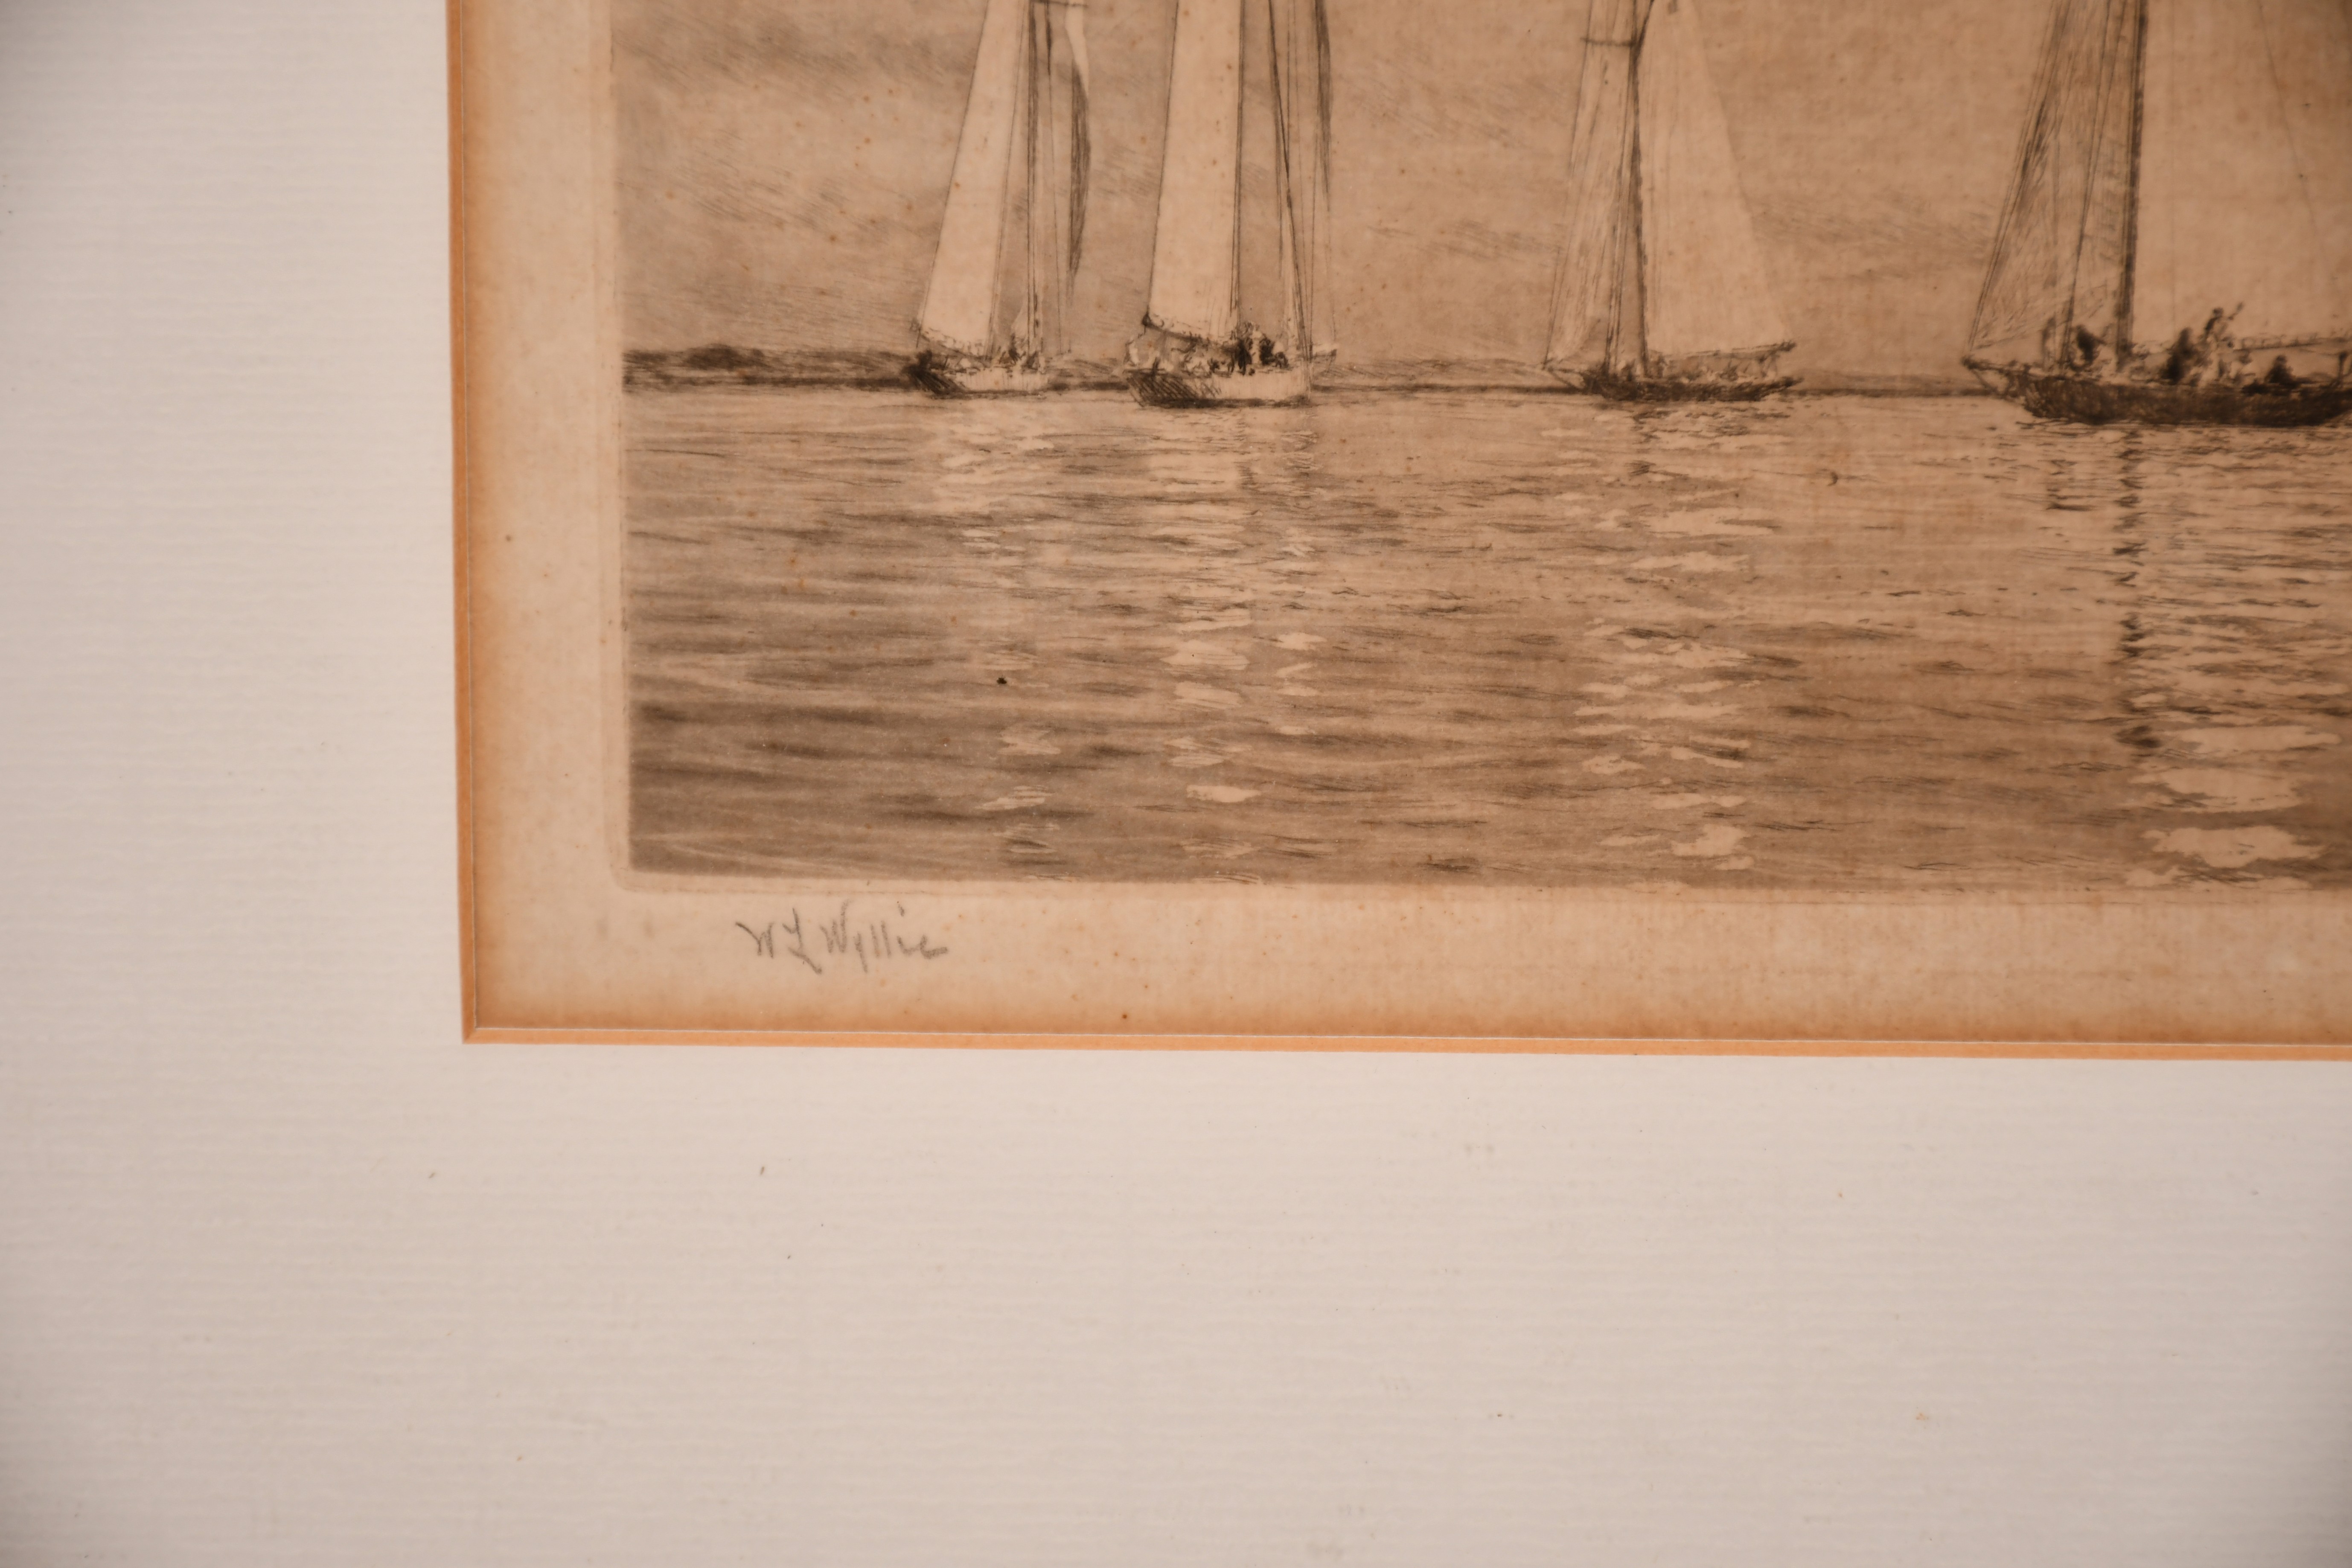 William Lionel Wyllie (1851-1931) British. “Yacht Racing off Cowes, (Isle of Wight)”, J Class - Image 3 of 5